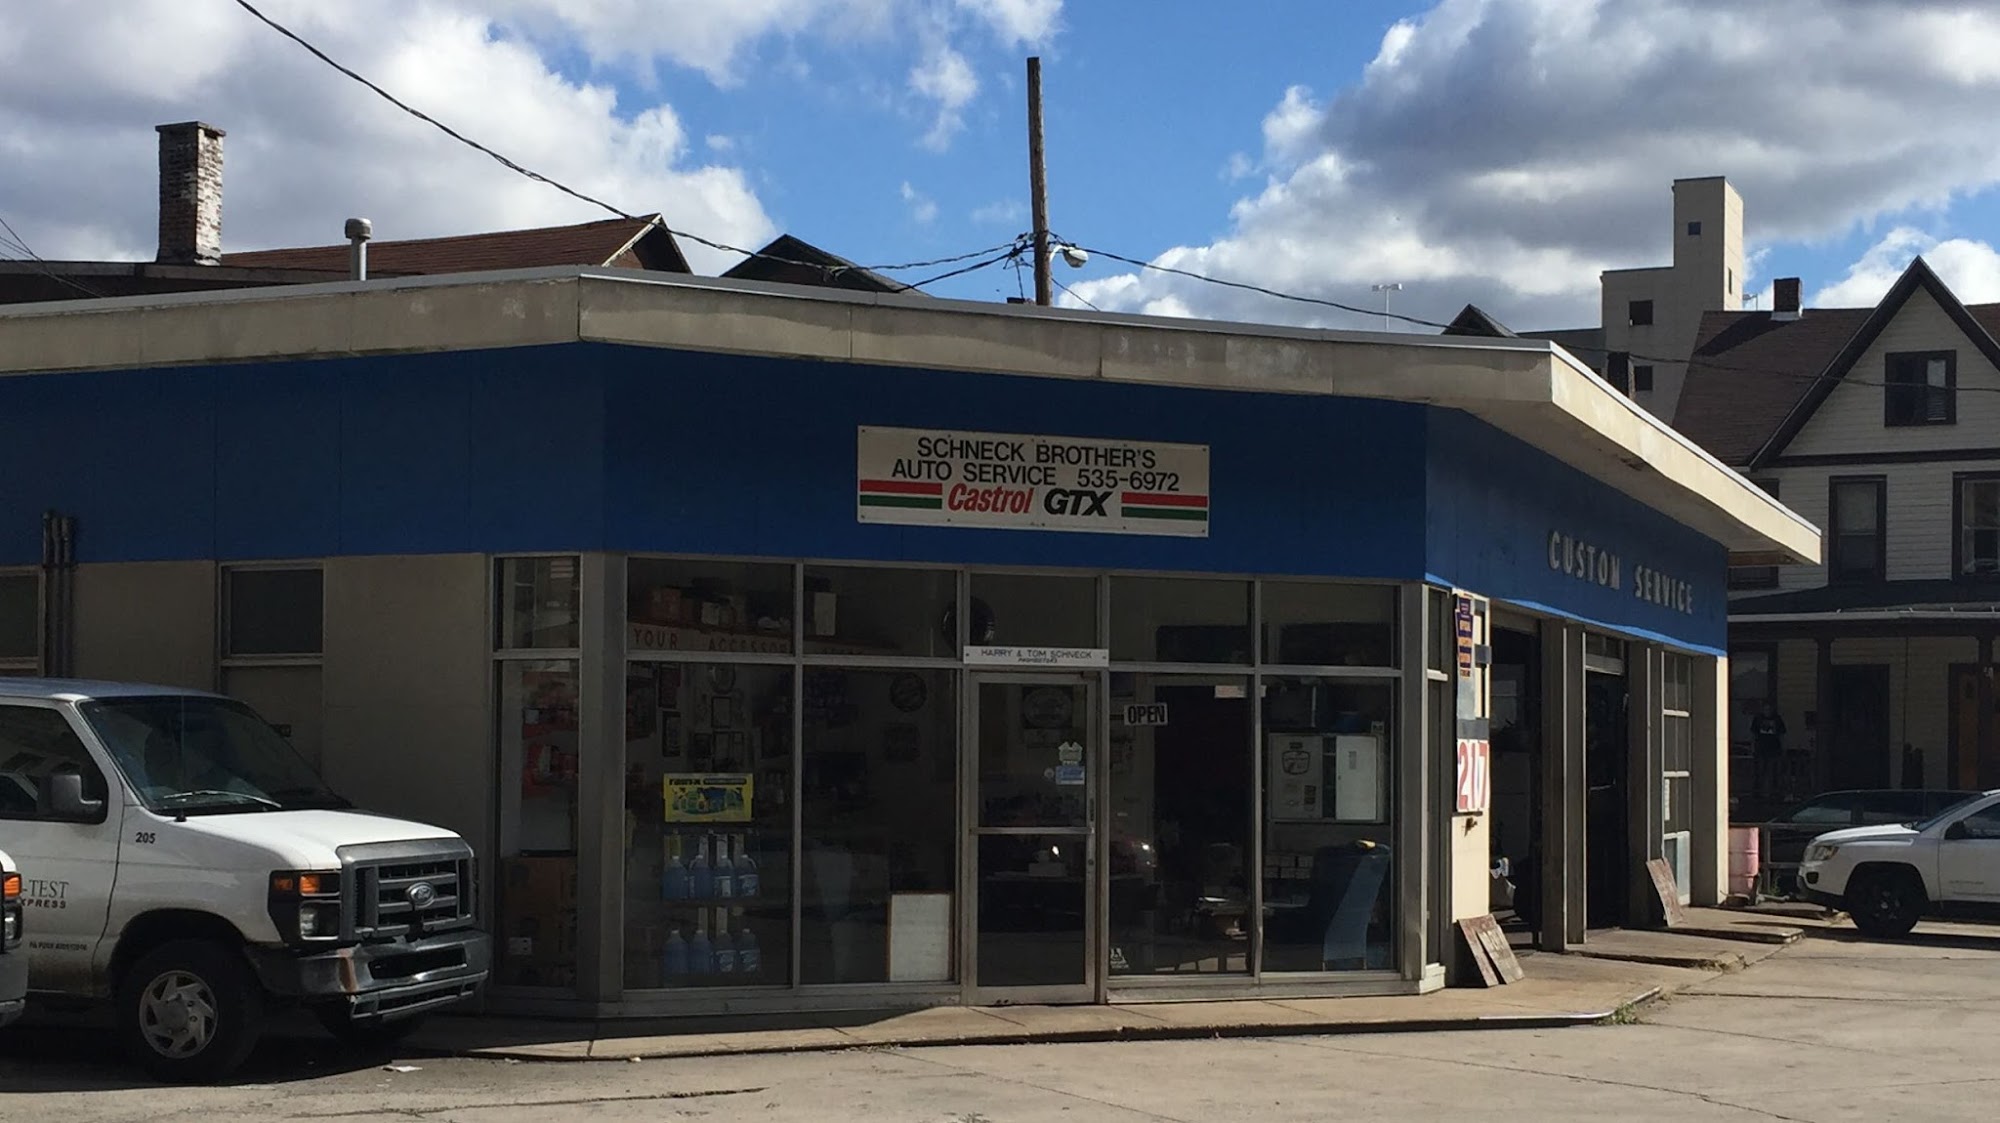 Schneck Brothers' Auto Service